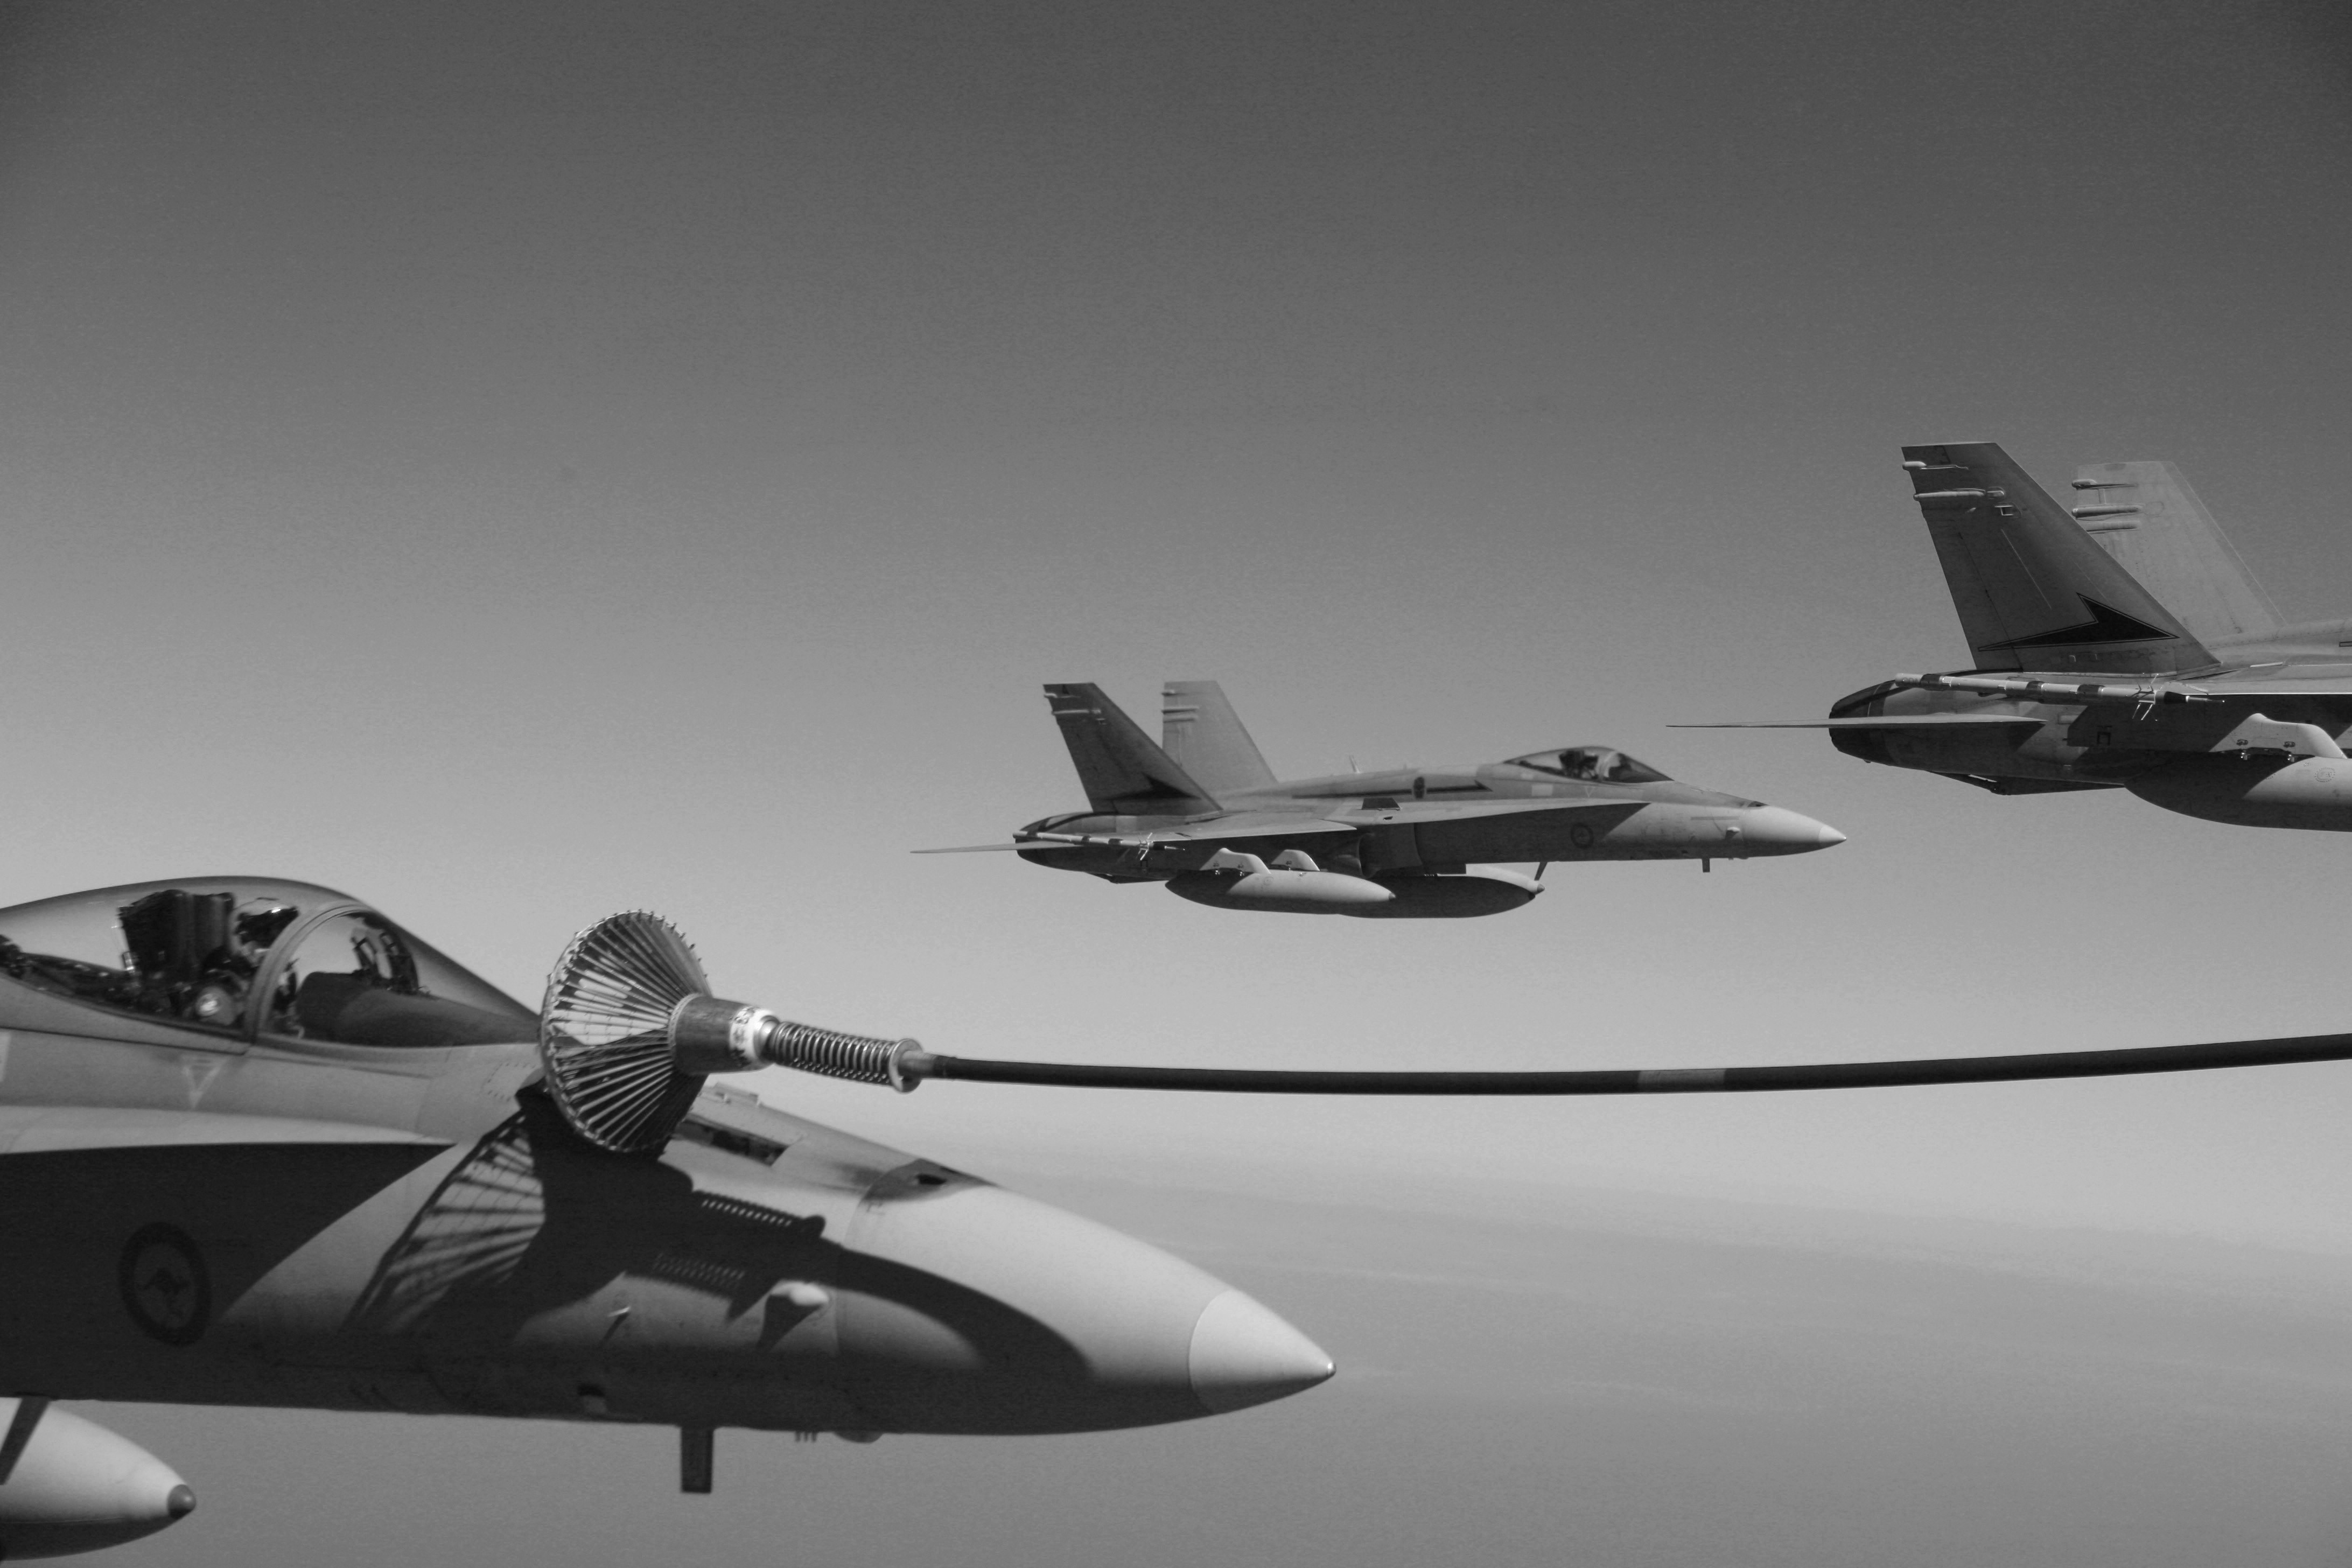 Four australian fa-18 aircrafts from the royal australian air force 77 squadron refueled alongside u.s. fa-18 hornet aircraft from marine fighter attack squadron 212 off the coast of australia june 20, 2007, during the exercise talisman sabre photo